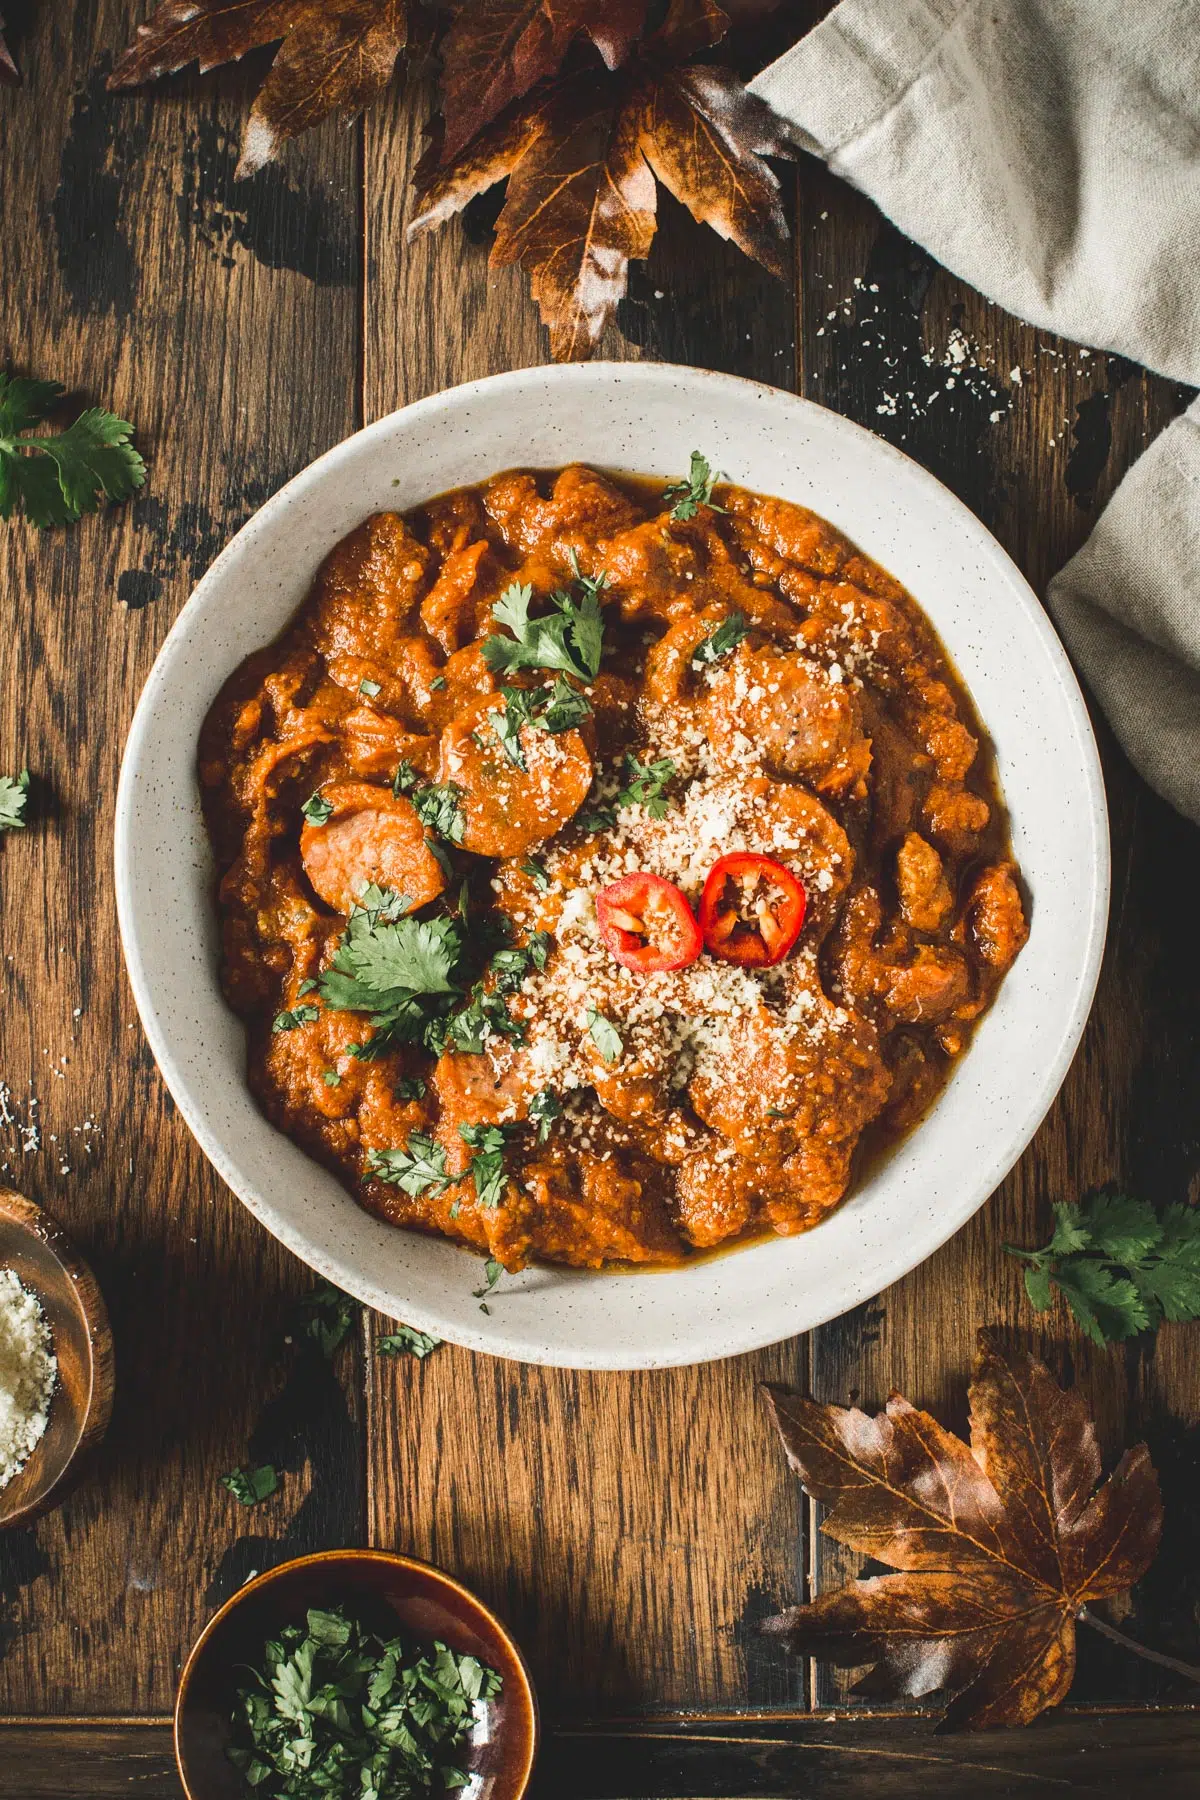 Pumpkin chili in a bowl topped with parmesan cheese.